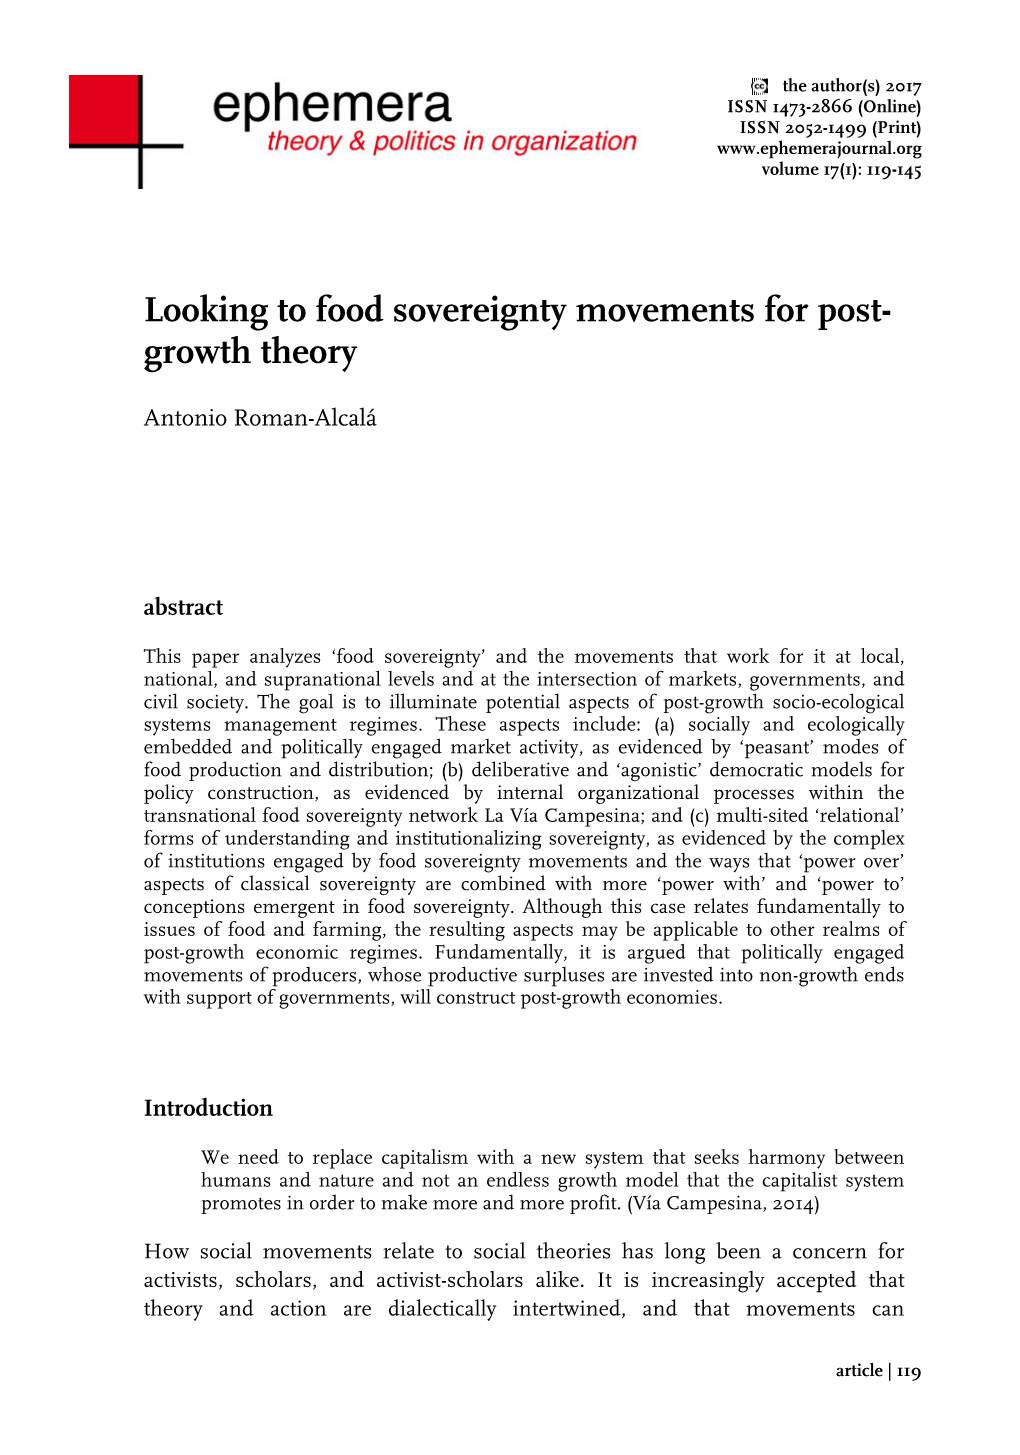 Looking to Food Sovereignty Movements for Post- Growth Theory